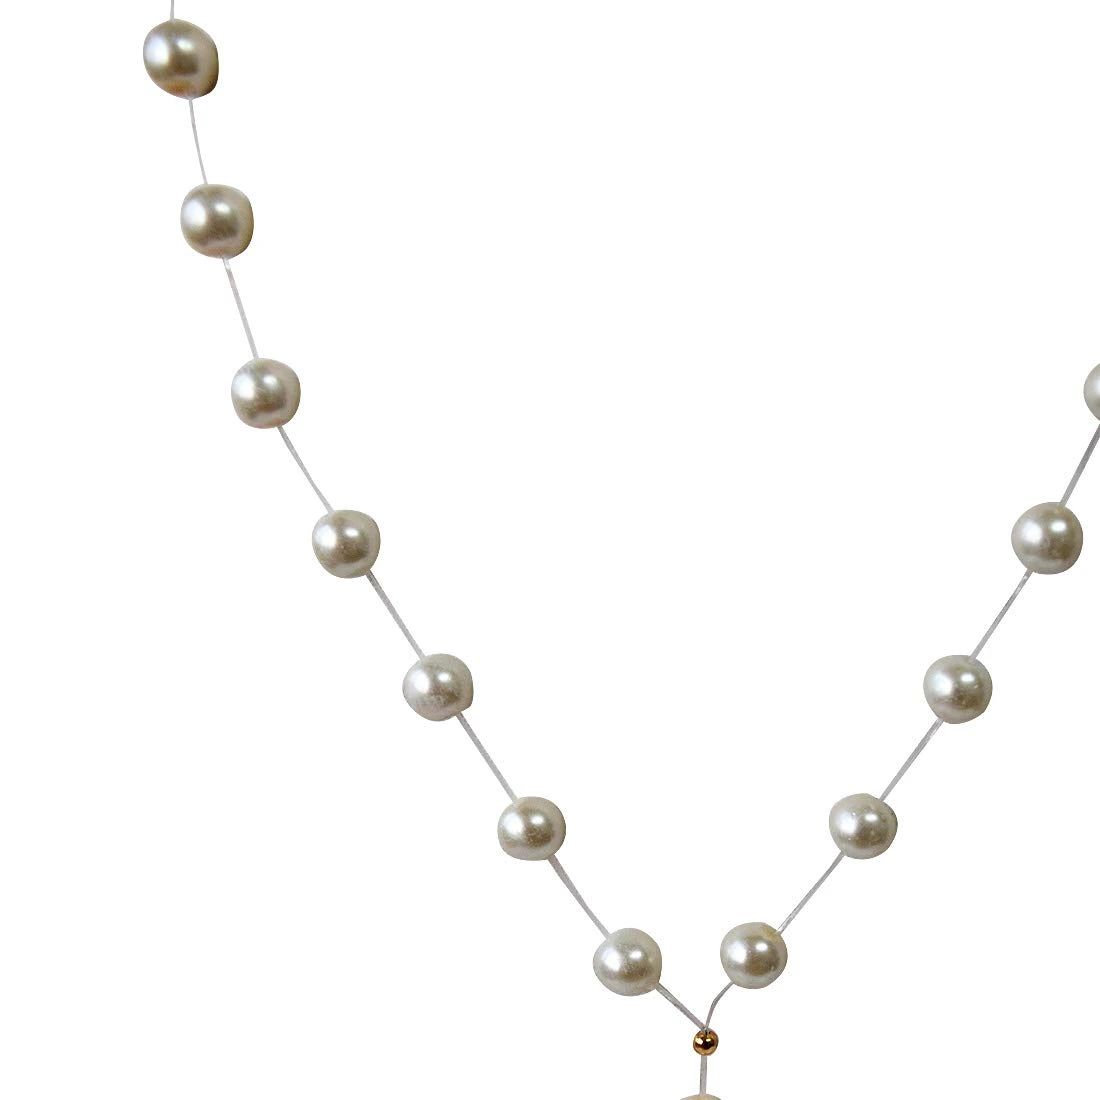 Single Line Invisible Strand Shell Pearl Necklace with Blue Stone Drop for Girls (SN957)